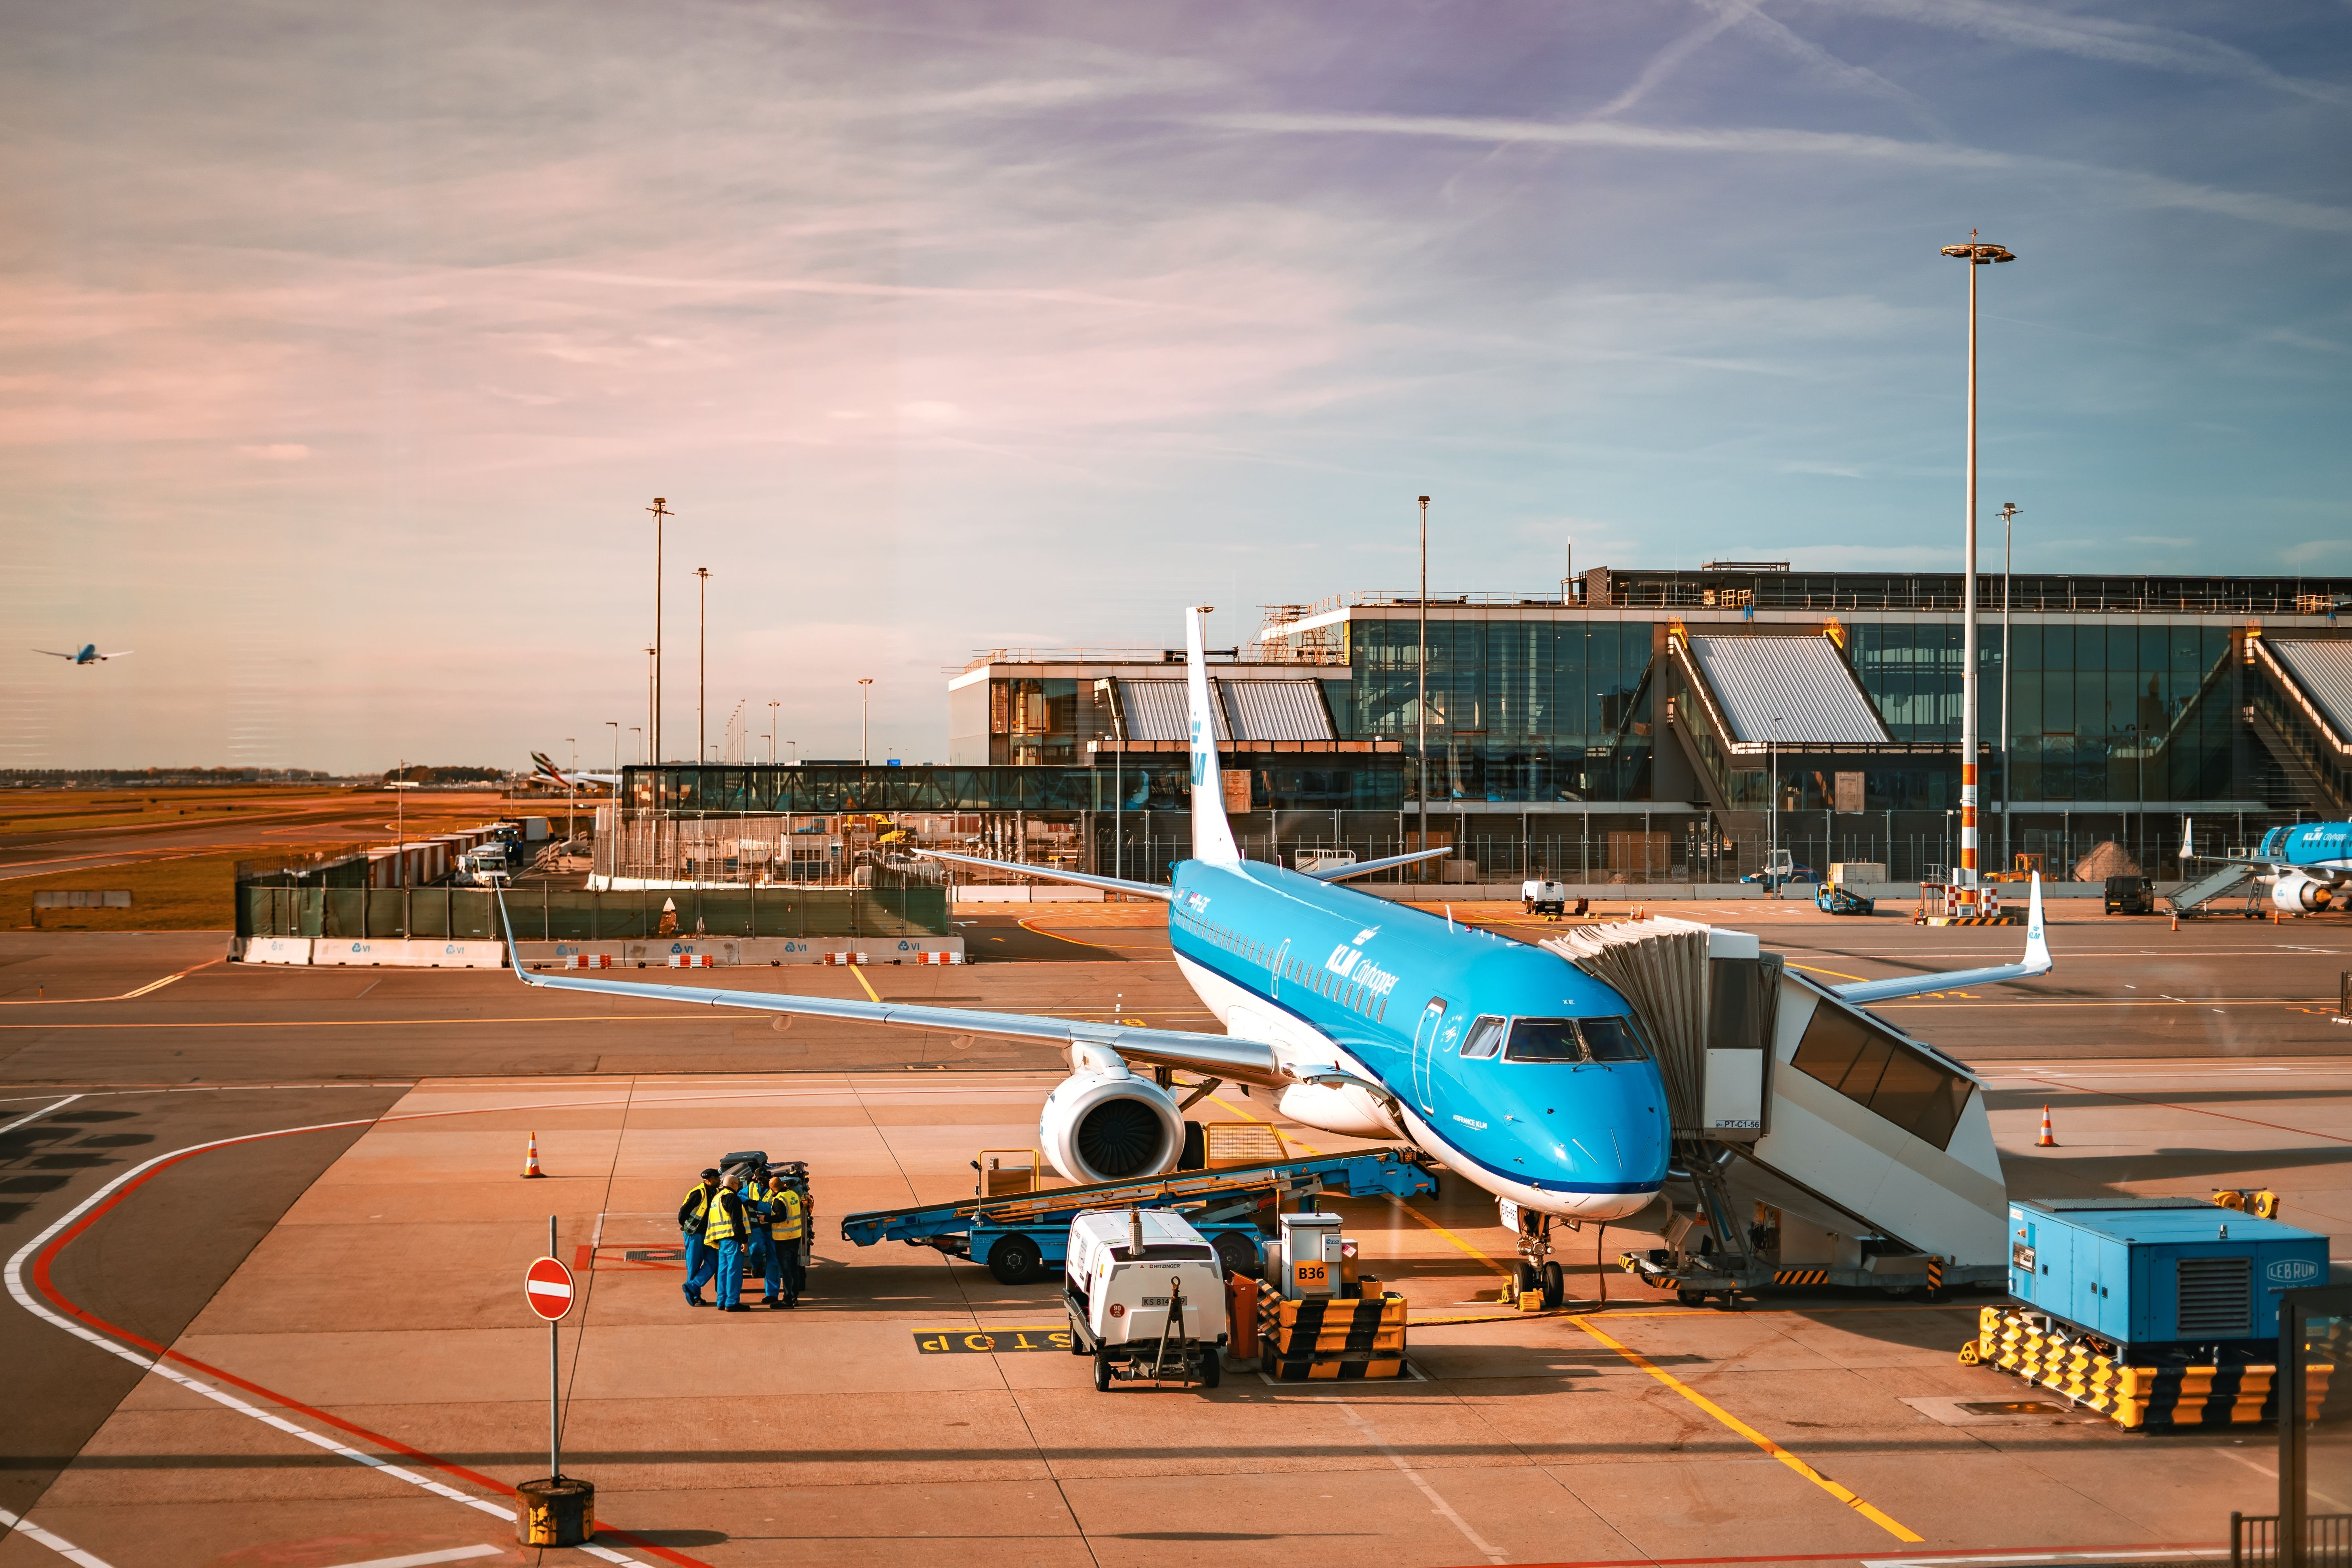 A KLM Cityhopper Embraer E-Jet Parked At Amsterdam Schiphol Airport.